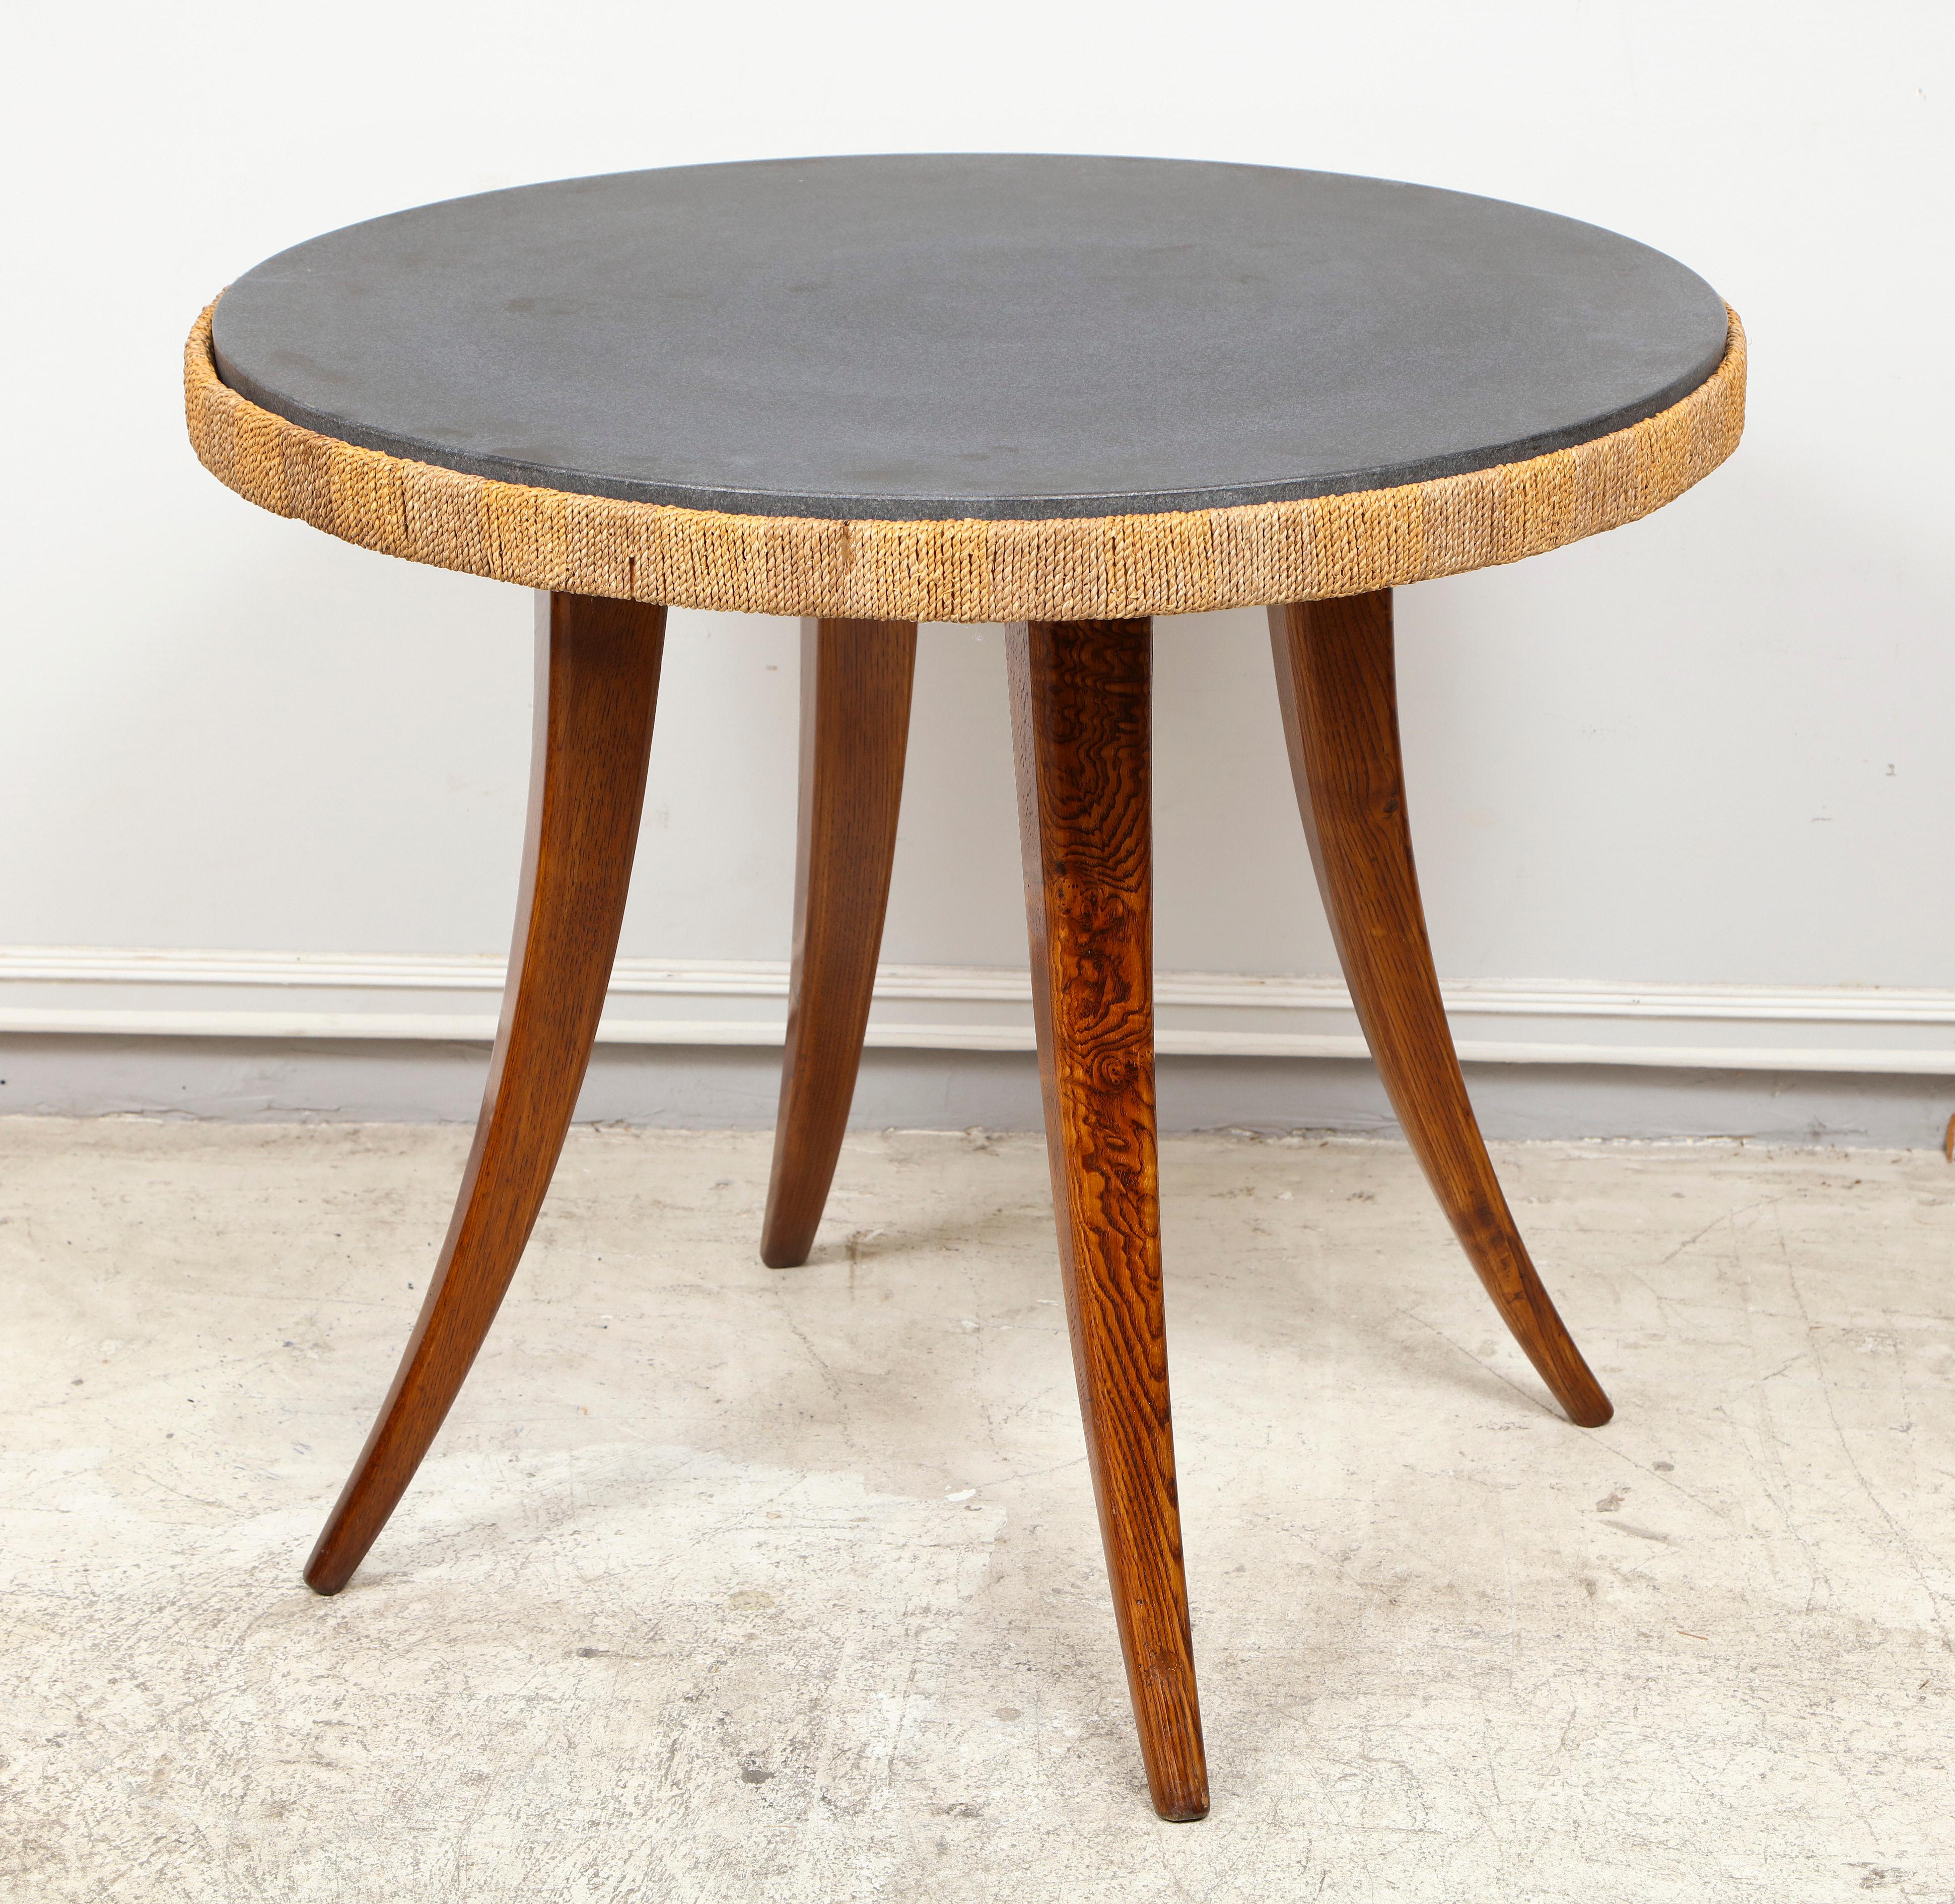 Unusual French 1940s marble-top table with Jute Apron on Stylized oak splayed legs.